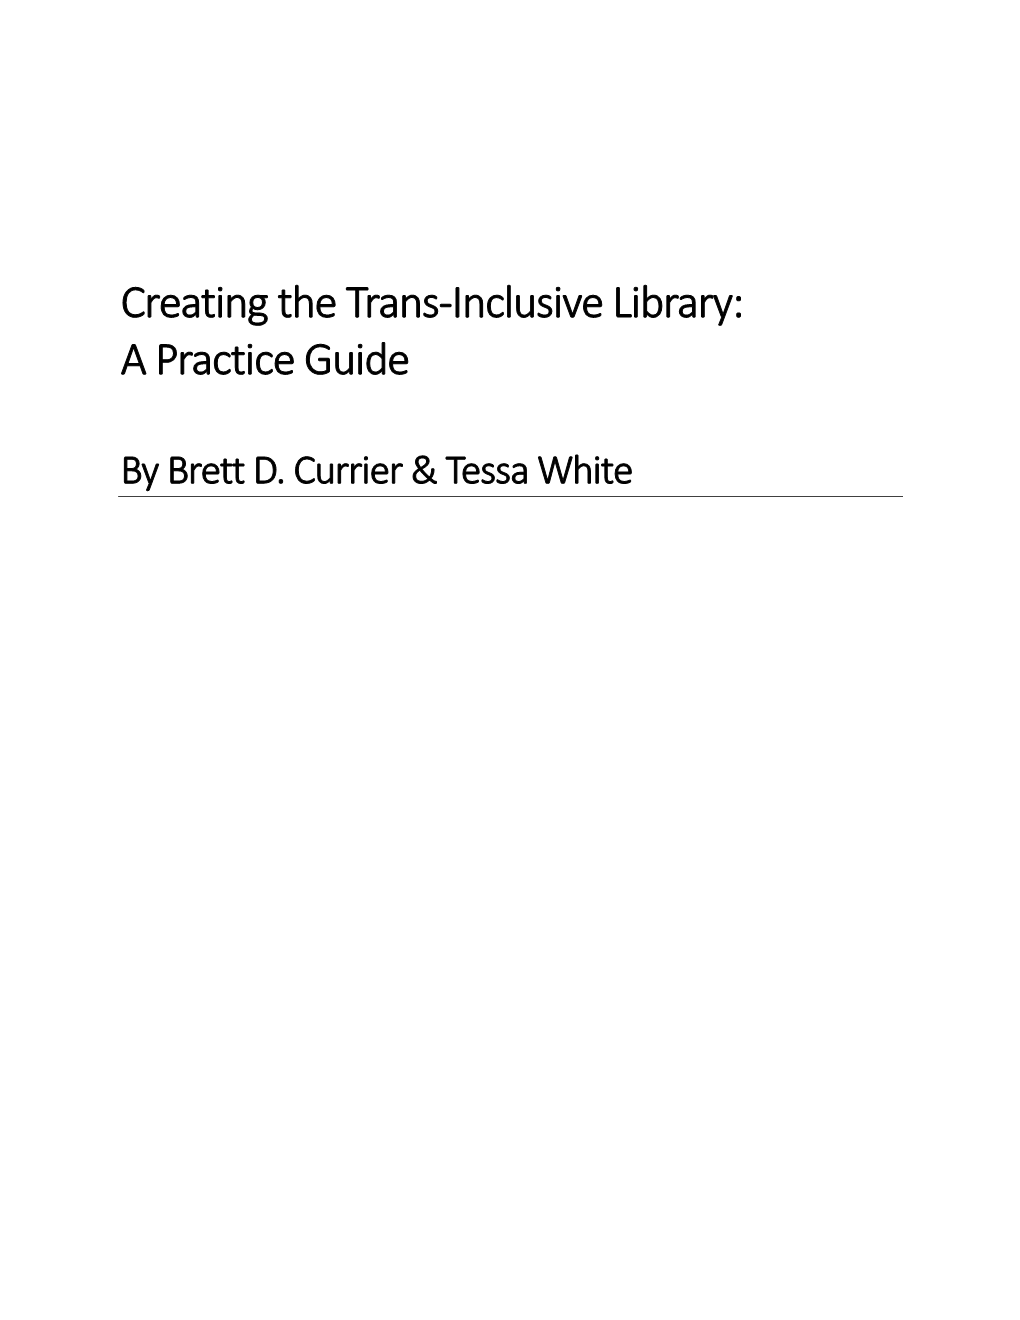 Creating the Trans-Inclusive Library: a Practice Guide